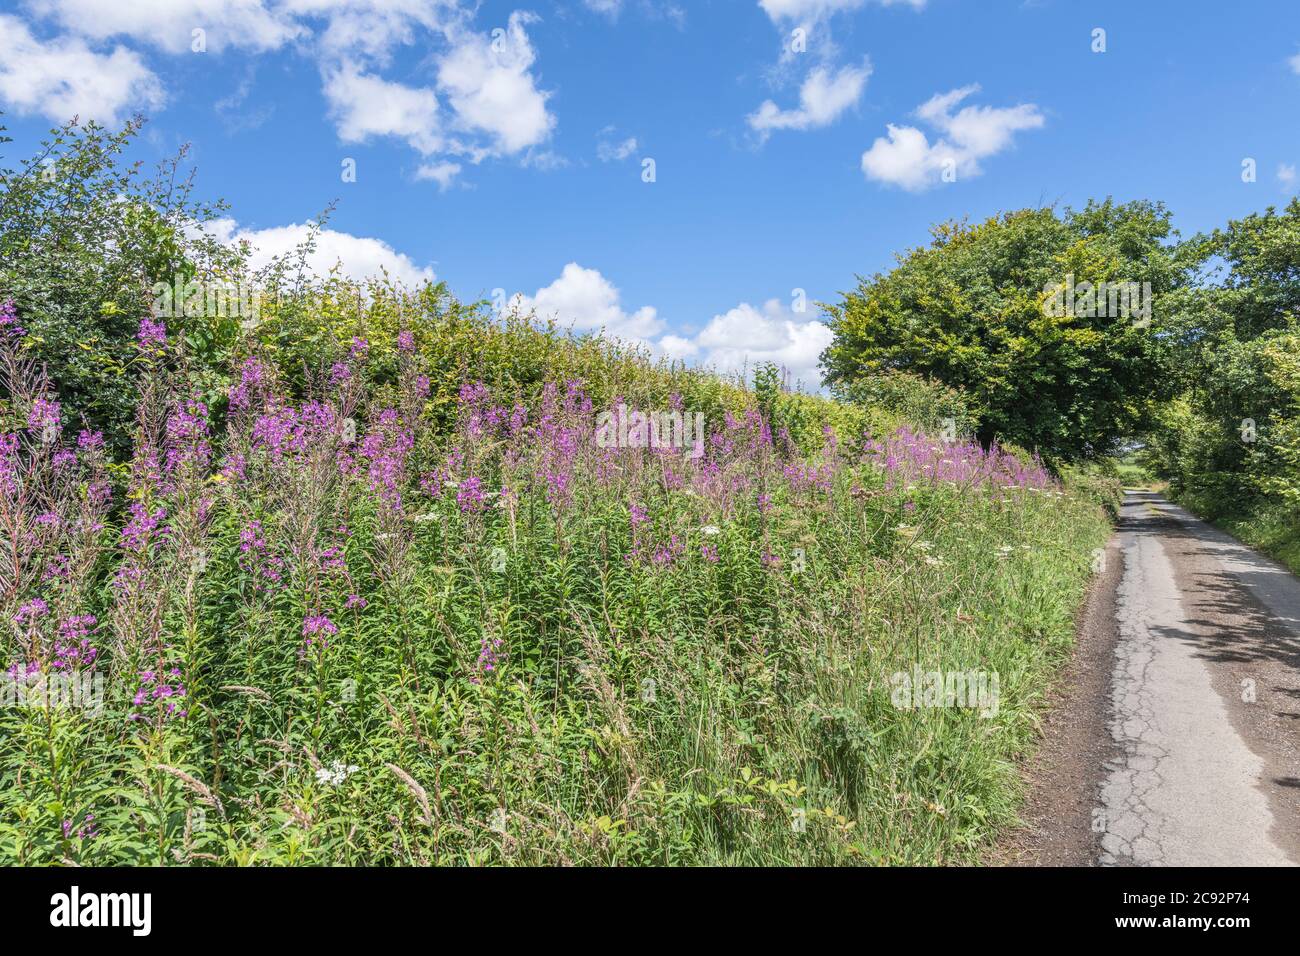 Rosebay Willowherb / Epilobium angustifolium colony beside a rural roadside hedge. Young leaves may be eaten cooked & was used as medicinal plant. Stock Photo